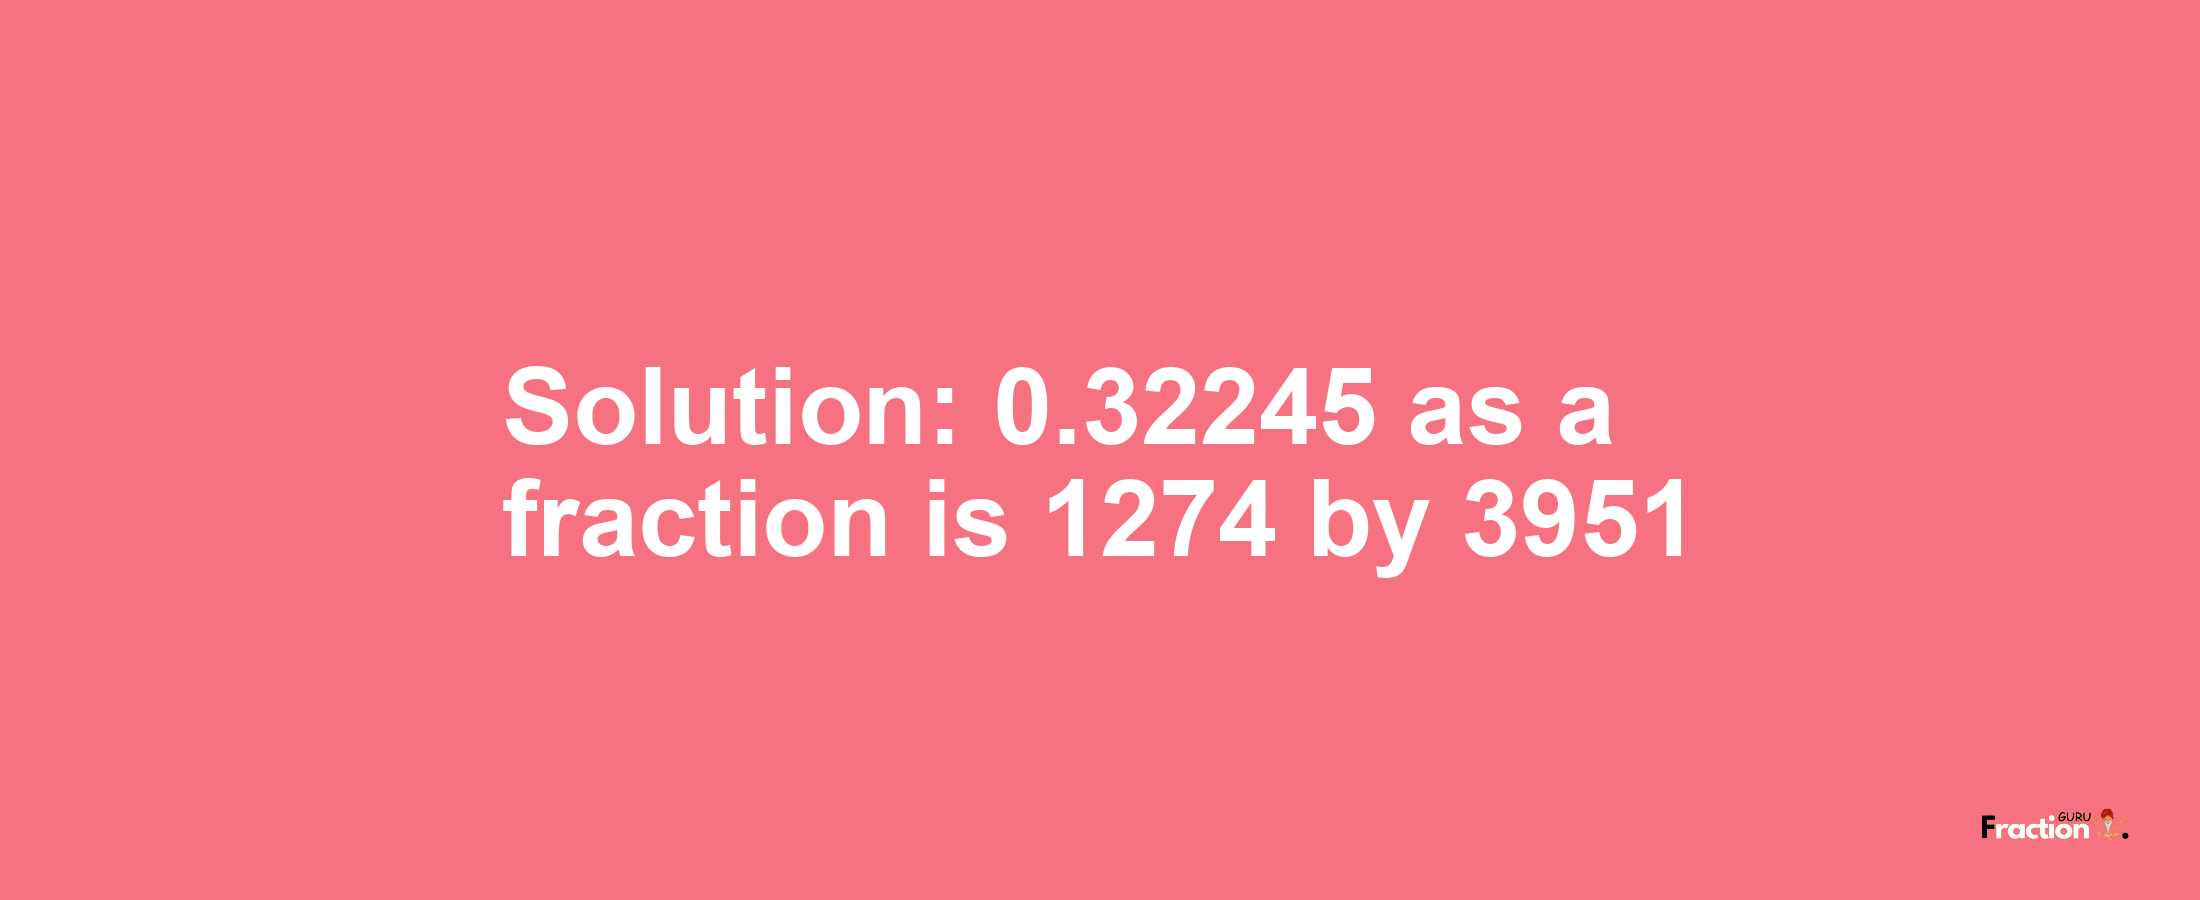 Solution:0.32245 as a fraction is 1274/3951